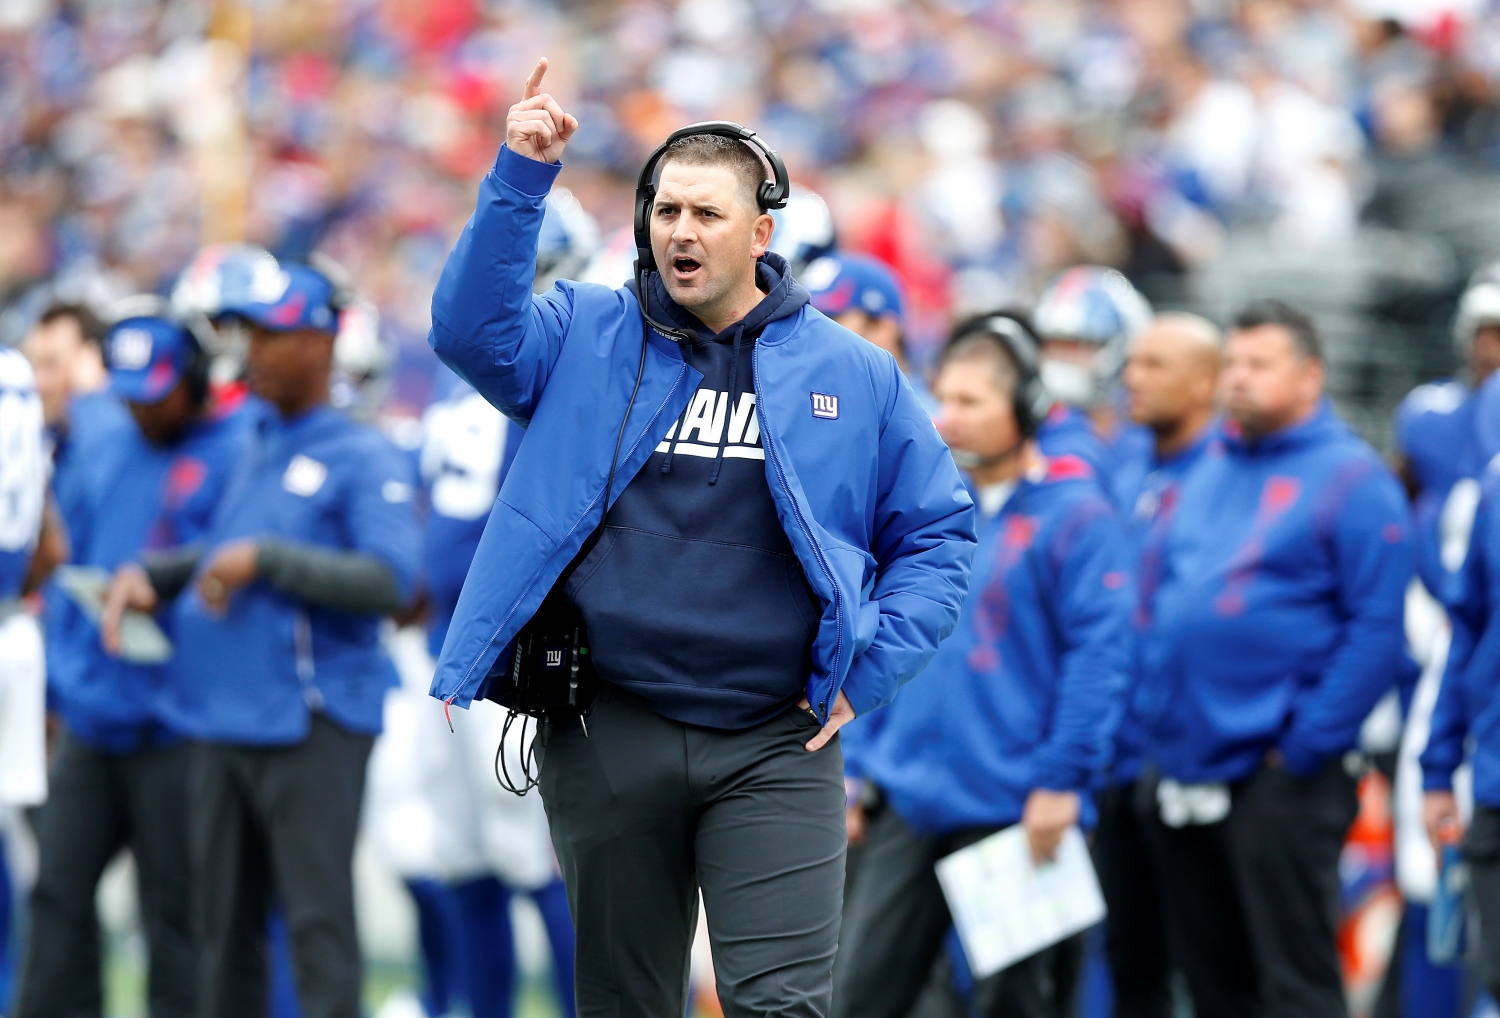 New York Giants coach Joe Judge in action during a game.